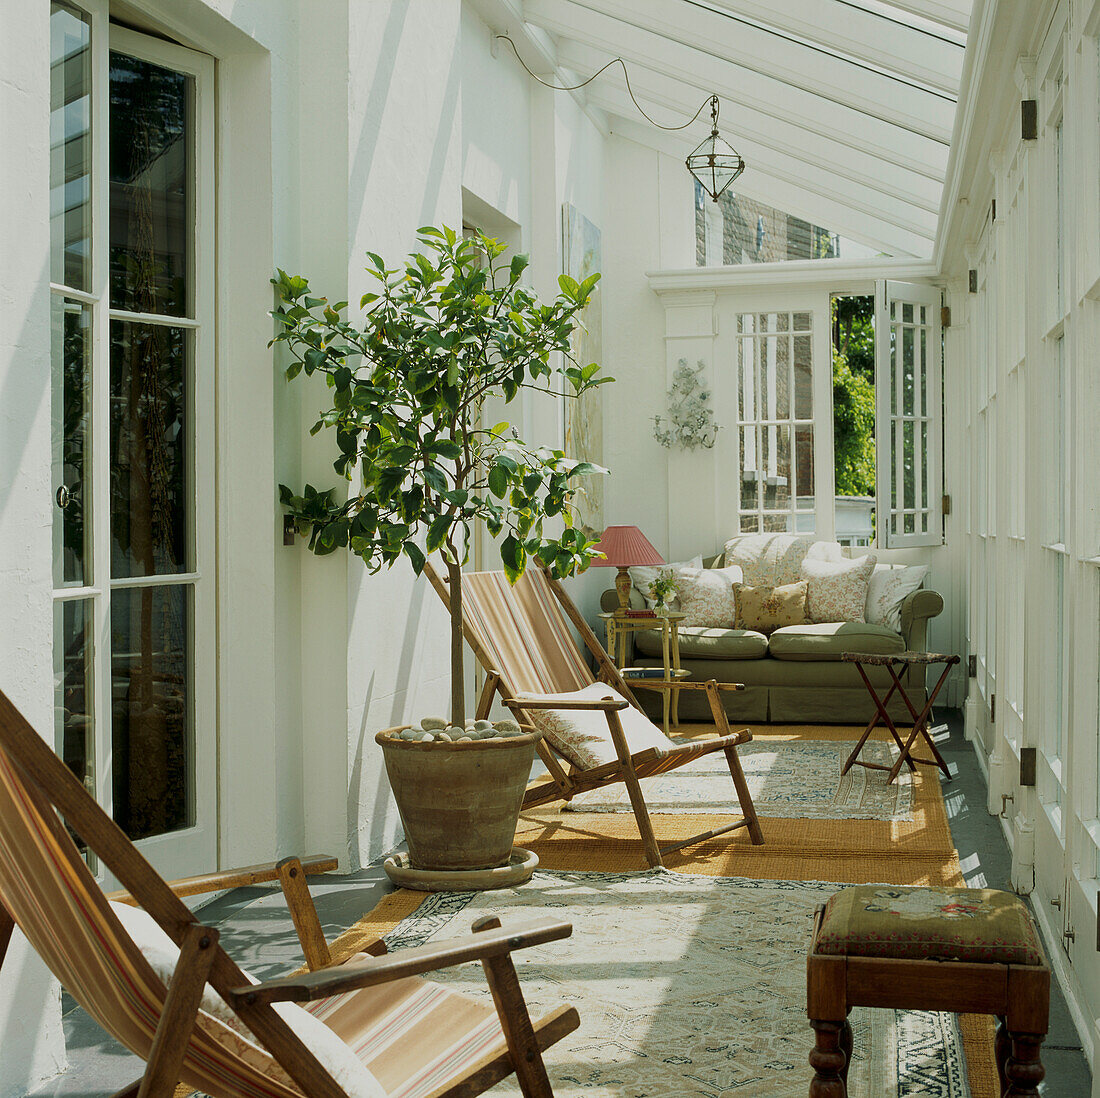 Deck chairs and orange trees in sunny white conservatory